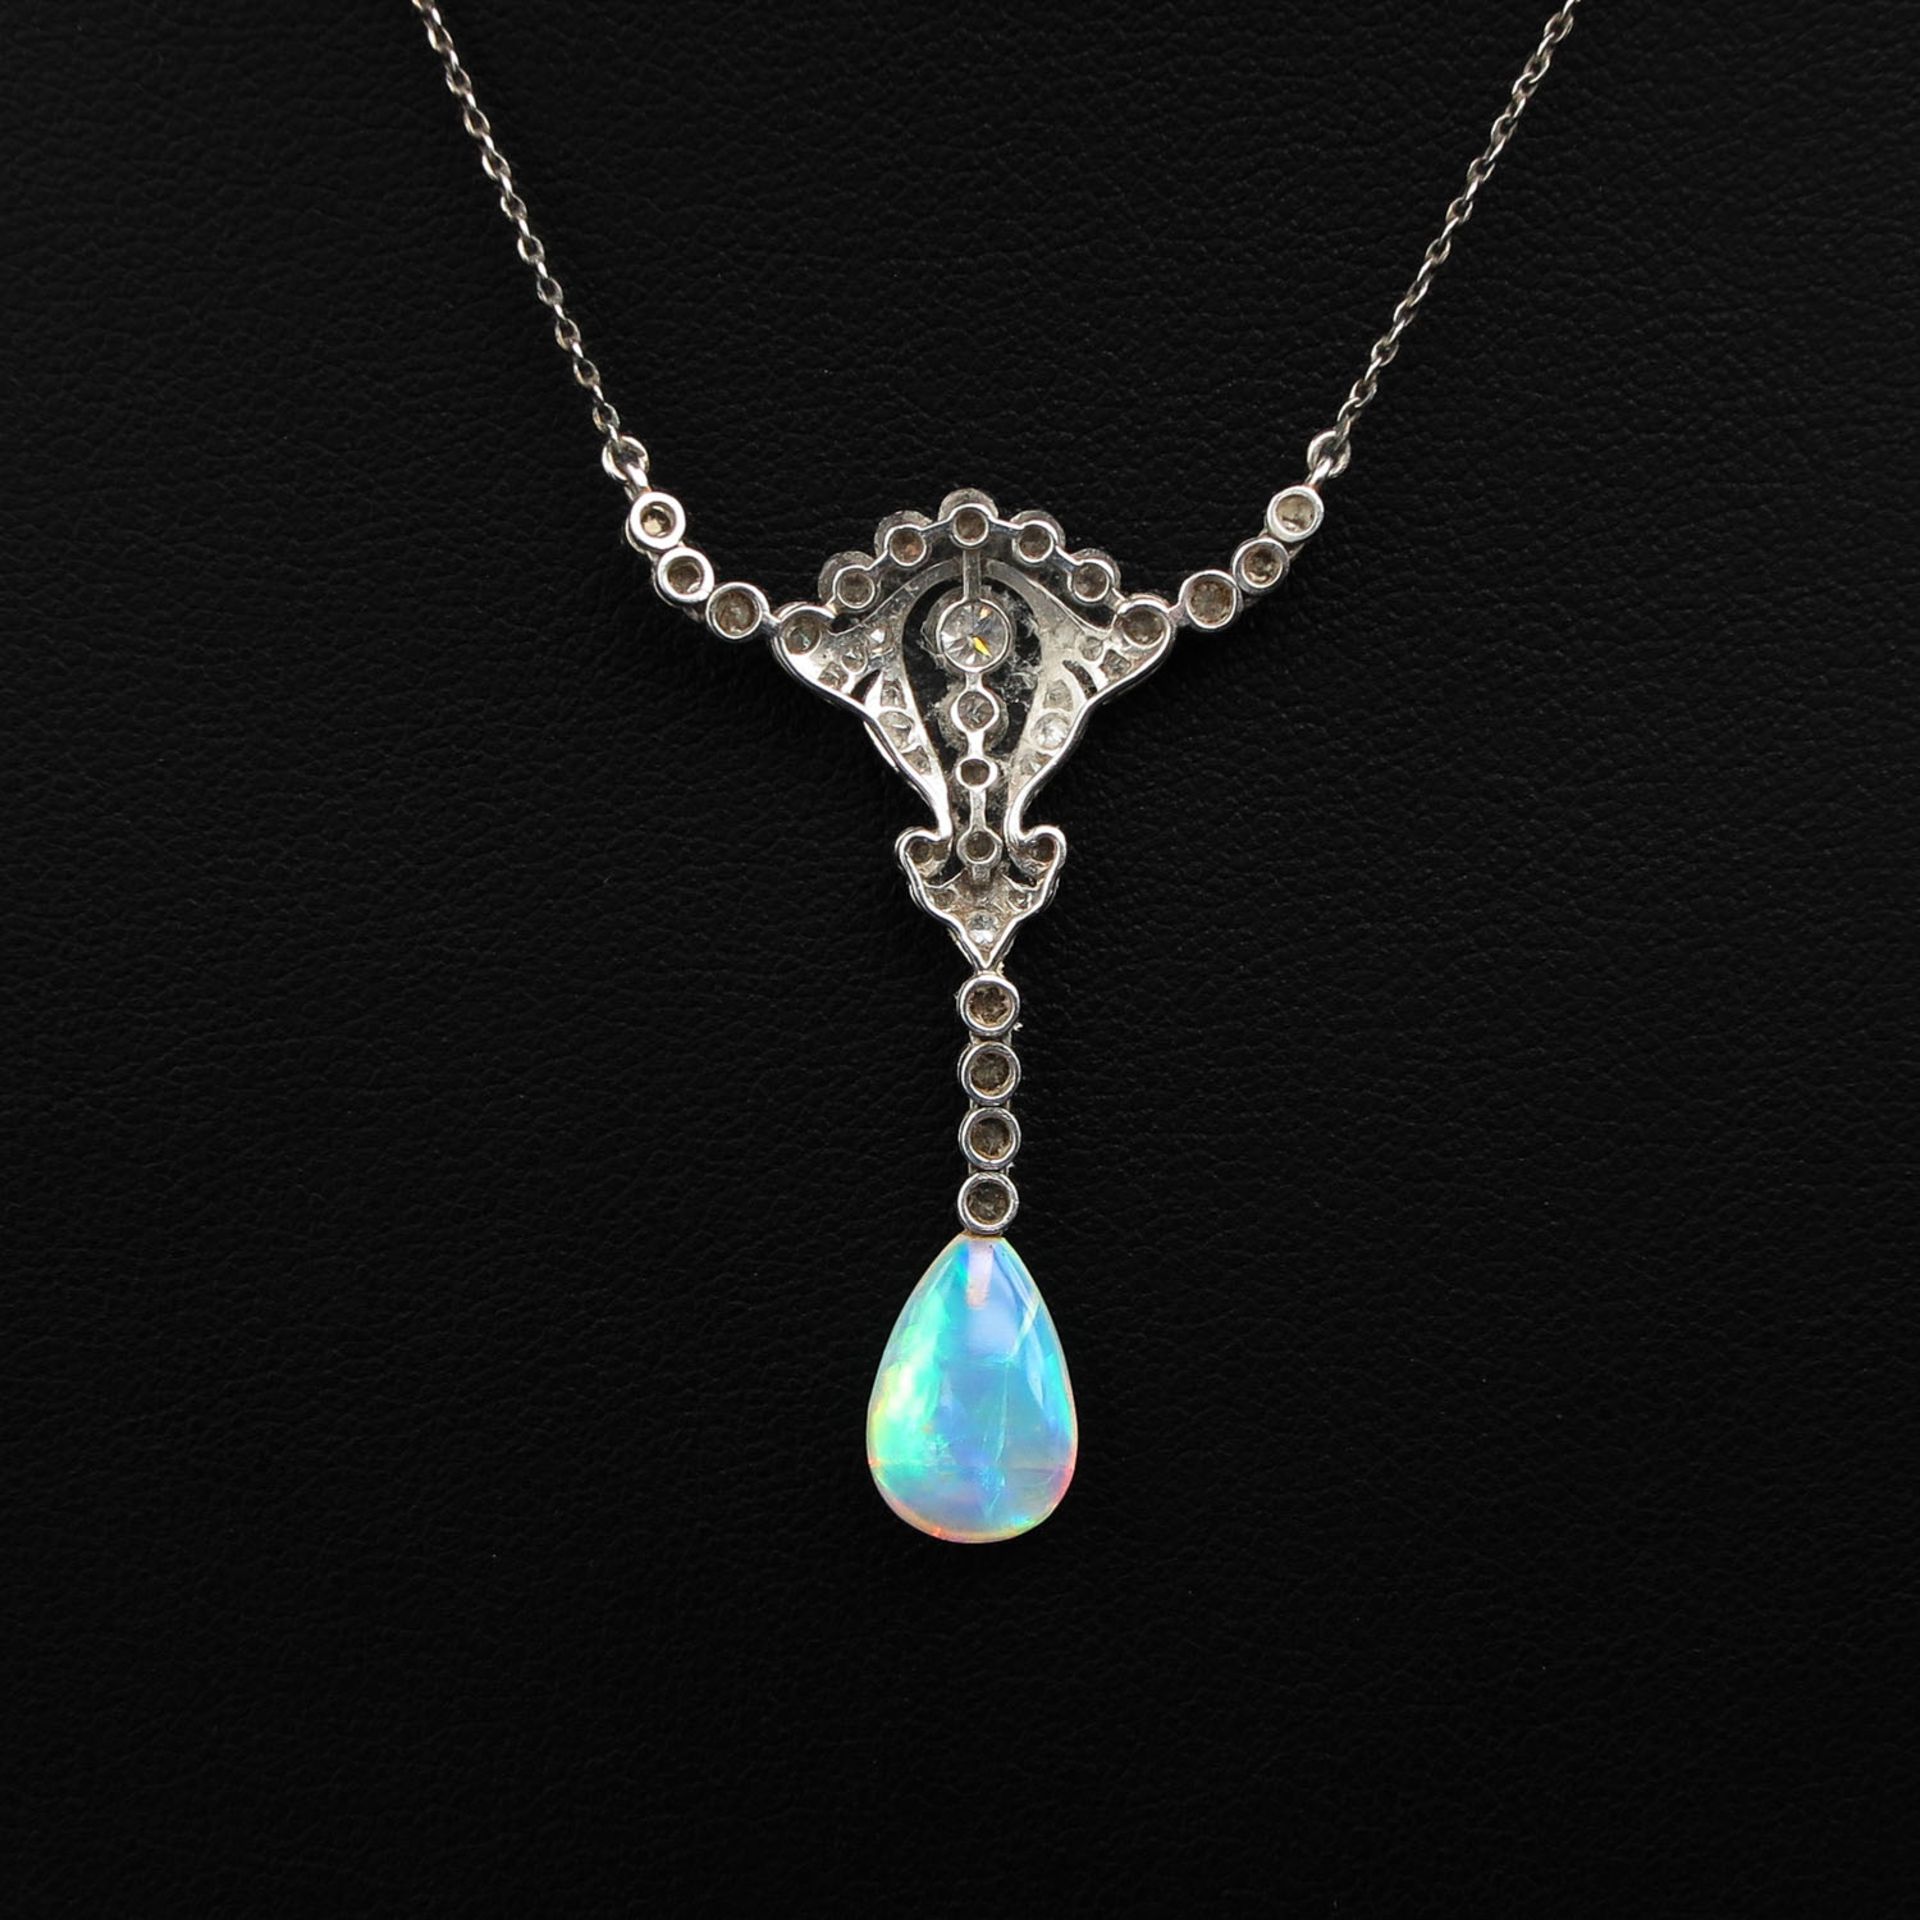 A Diamond and Opal Necklace Circa 1920 - Image 3 of 3